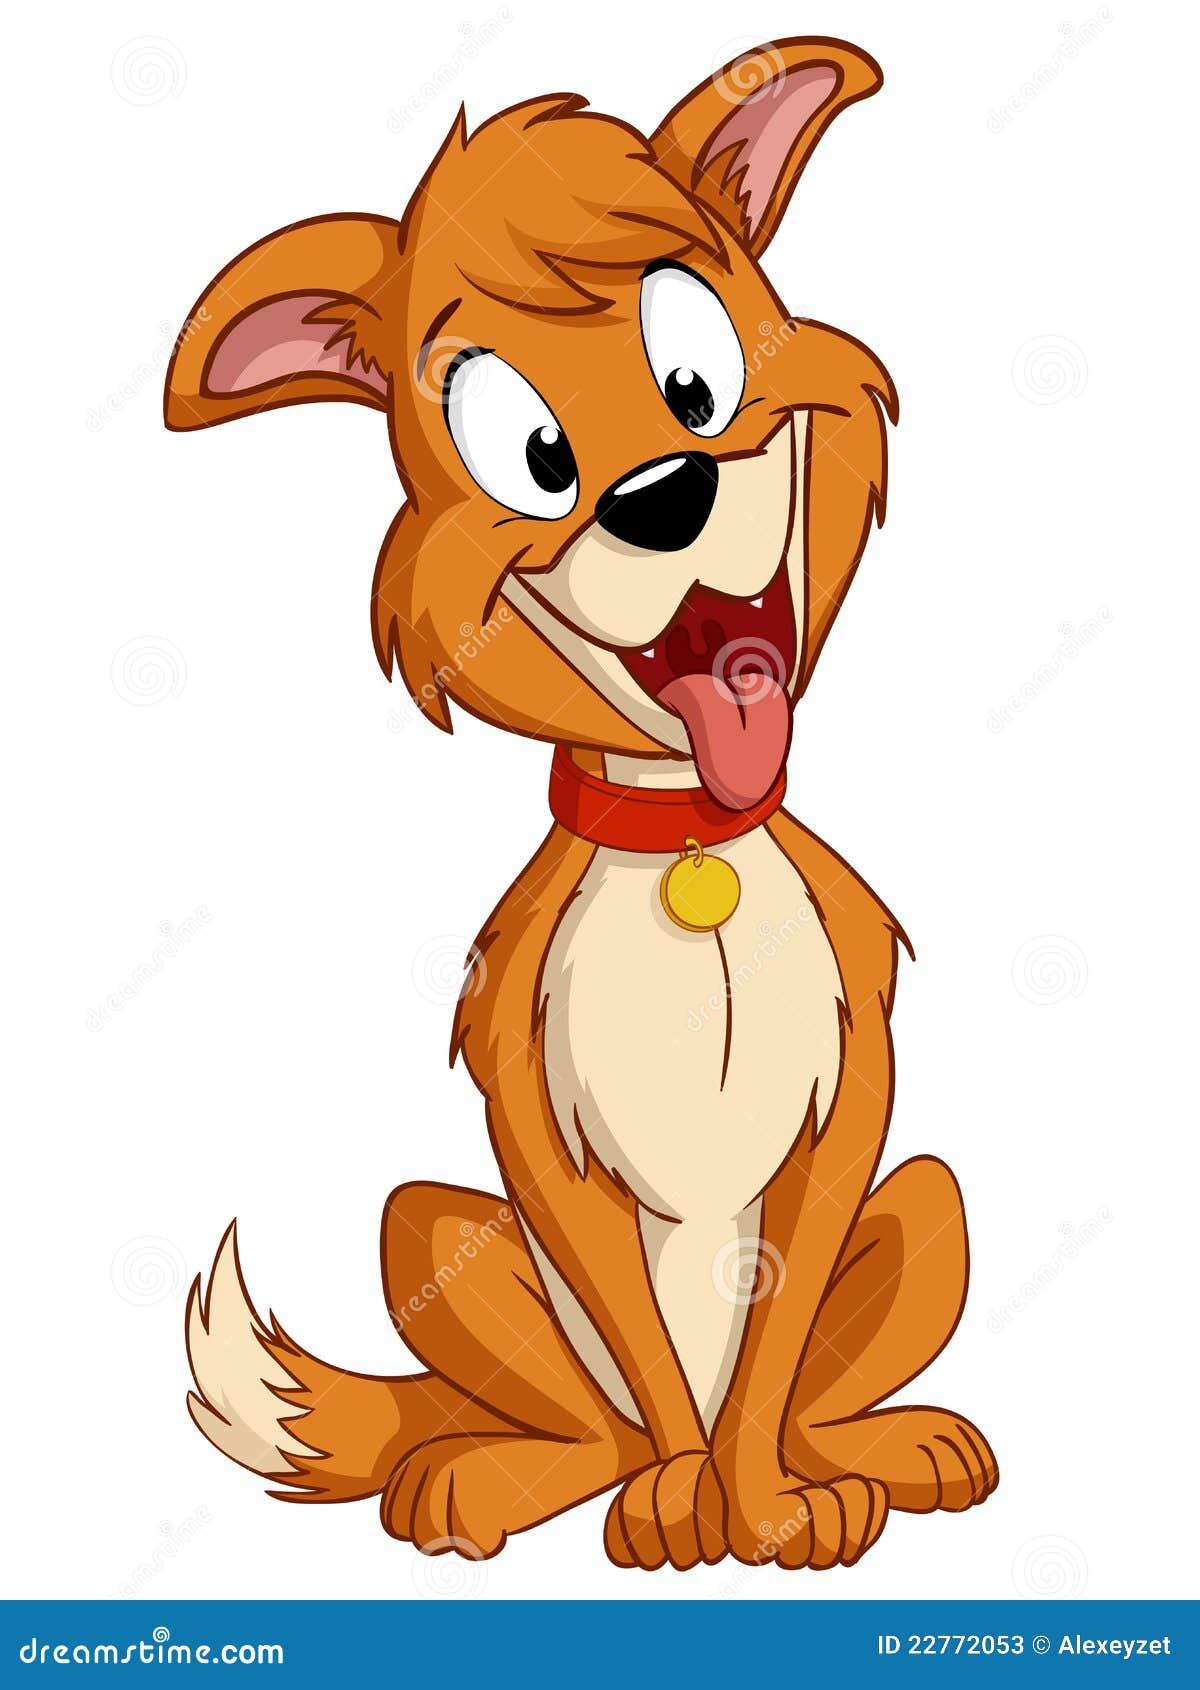 Cartoon Silly Dog With Red Collar Stock Photos - Image: 22772053